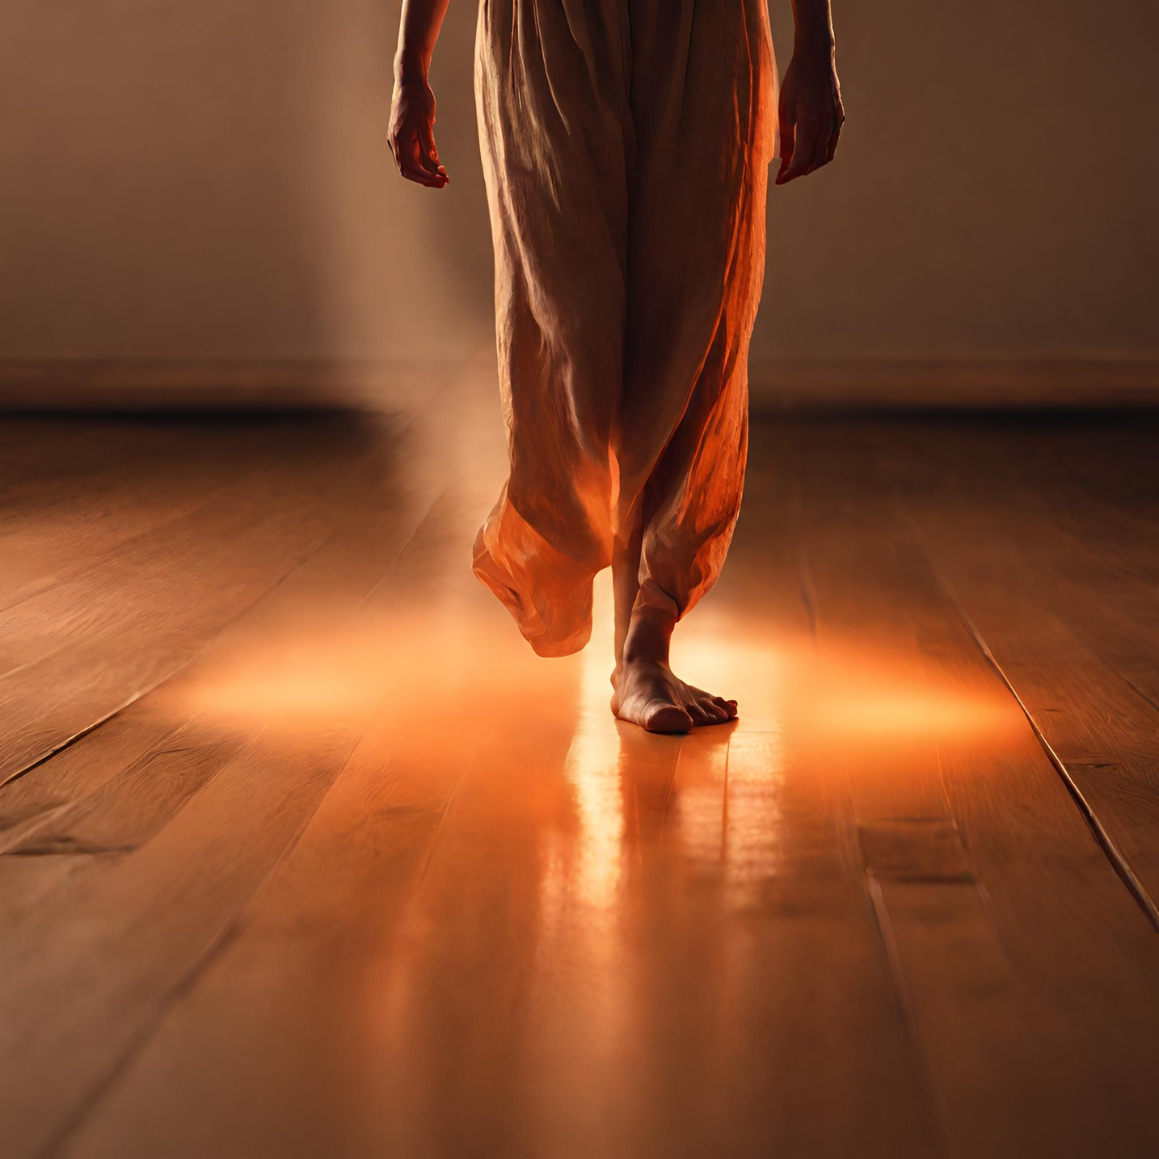 person walking barefoot over a wooden floor which is glowing orange to depict heat